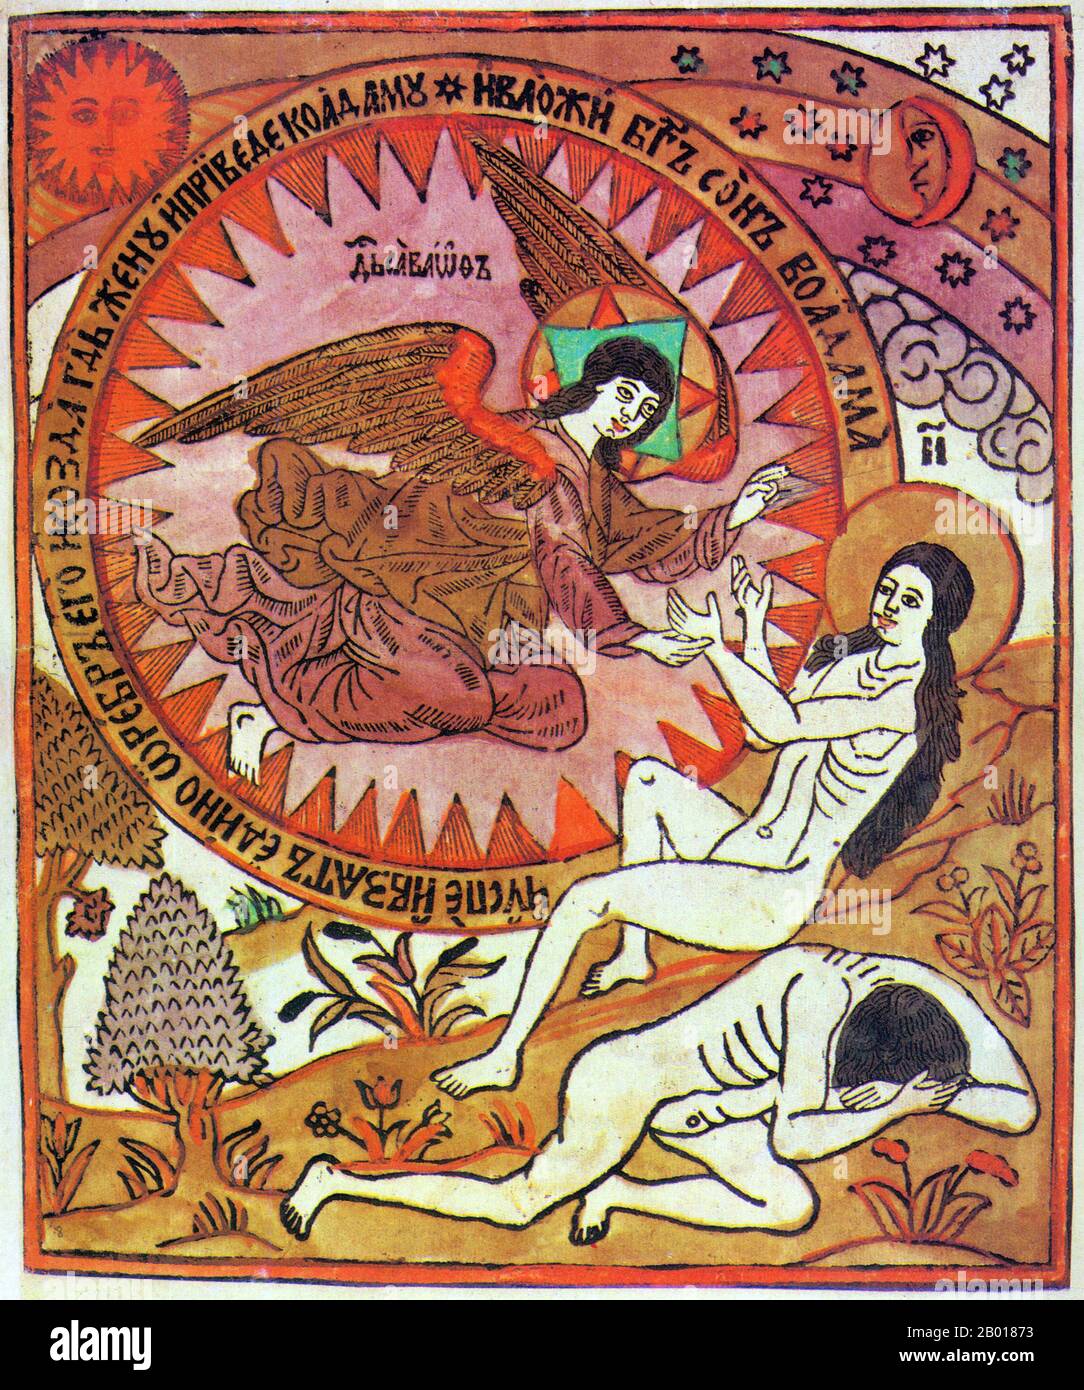 Russia: Adam and Eve as represented on a woodcut in a Russian lubok, 1792.  A lubok is a Russian popular print, defined by simple graphics and narratives inspired by literature, religious stories and folk tales. Lubki prints were used as decoration in houses and inns. Early examples from the late 17th and early 18th centuries were woodcuts, then engravings or etchings were typical, and from the mid-19th century lithography. They sometimes appeared in series, which might be regarded as predecessors of the modern comic strip. Stock Photo